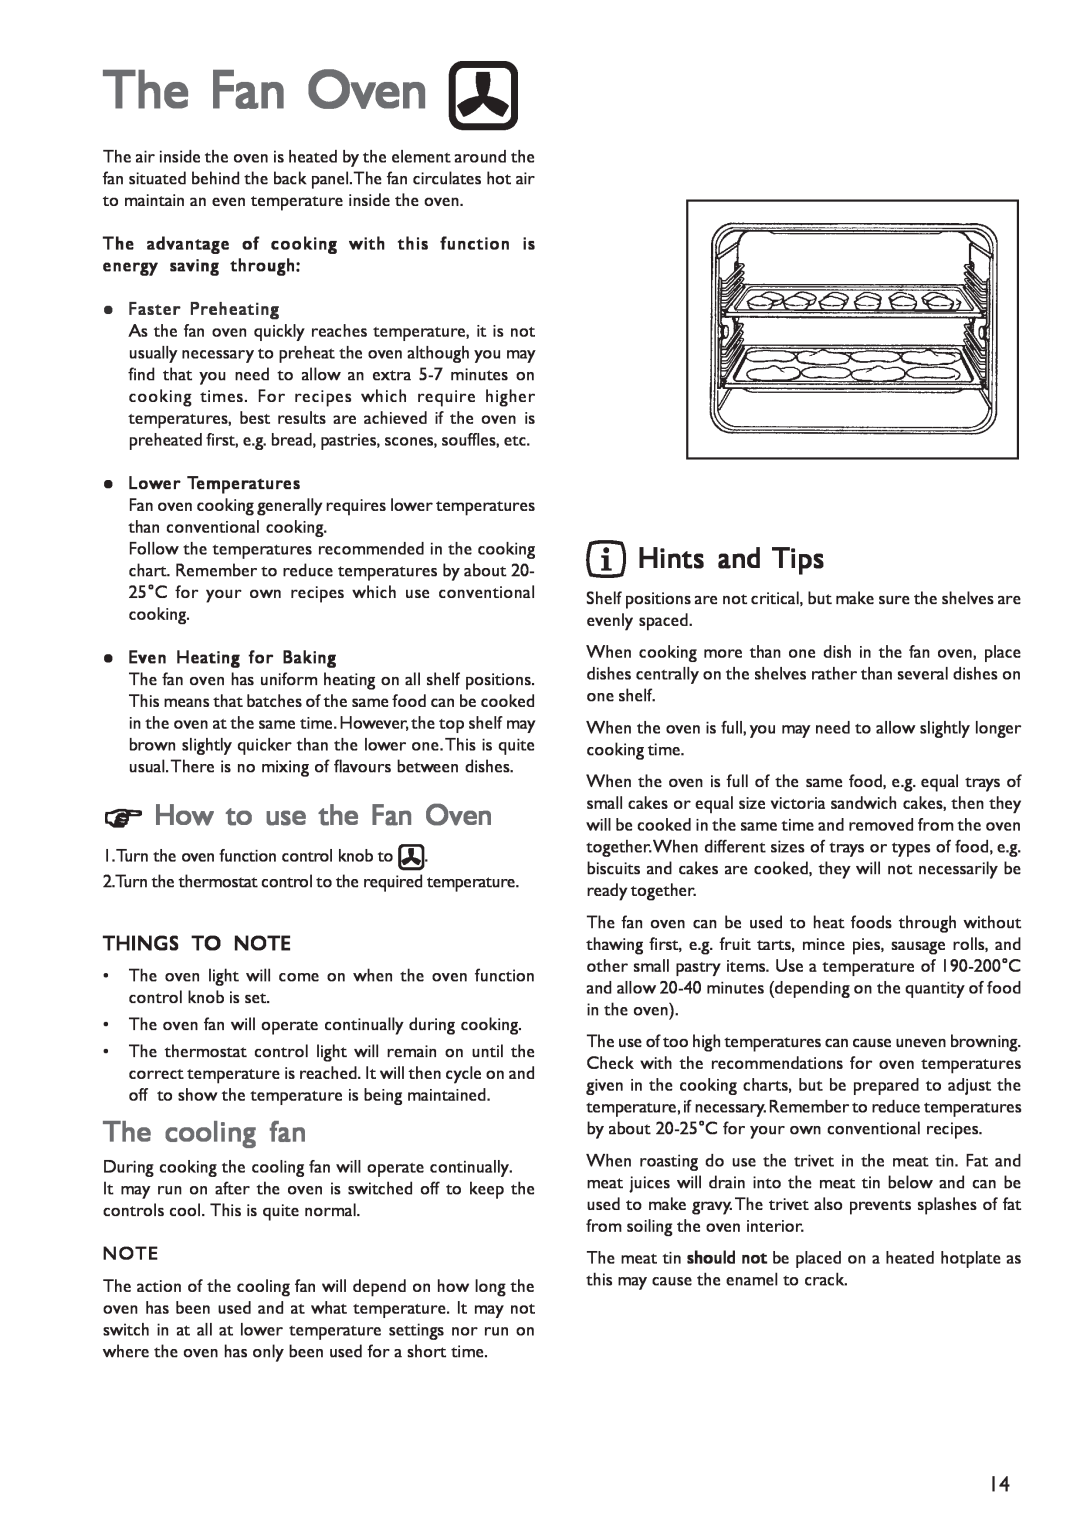 John Lewis JLBIOS601 The Fan Oven, How to use the Fan Oven, The cooling fan, Hints and Tips, Things To Note 